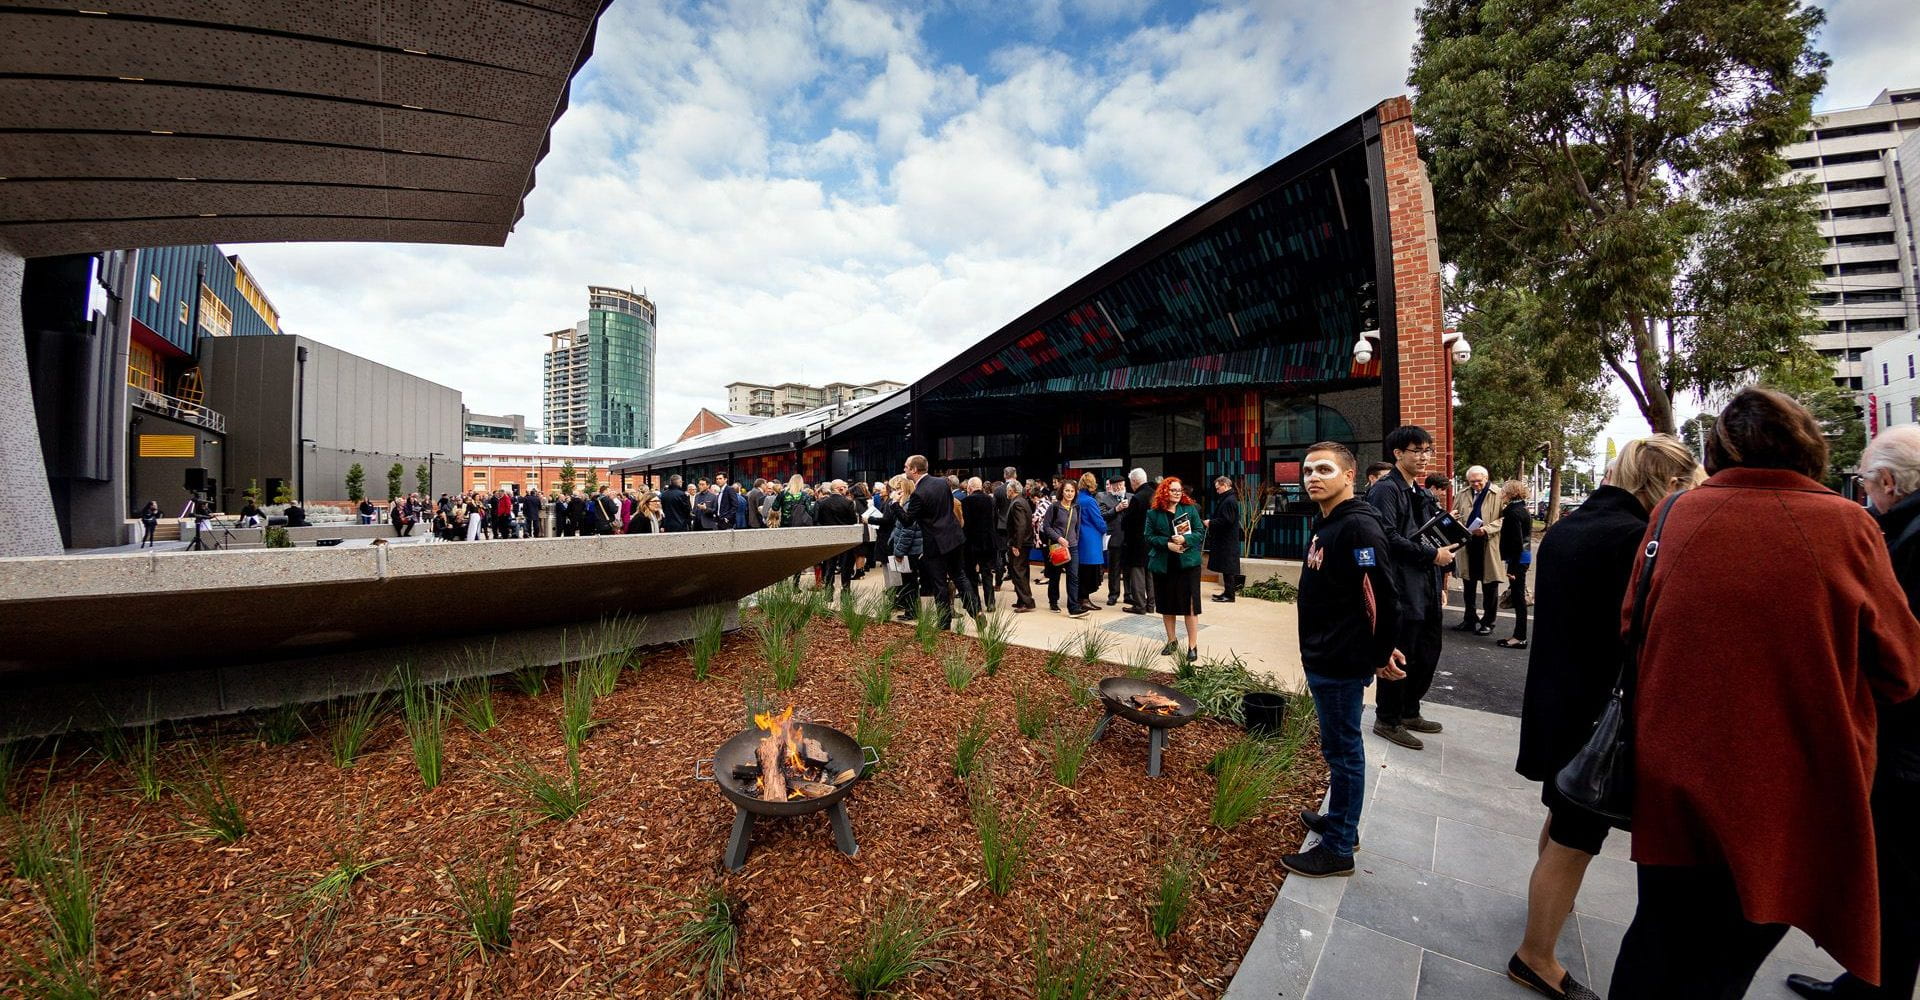 Opening event with crowds outside Faculty of Fine Arts and Music building, with Melbourne city in the background. Fire burning the foreground.